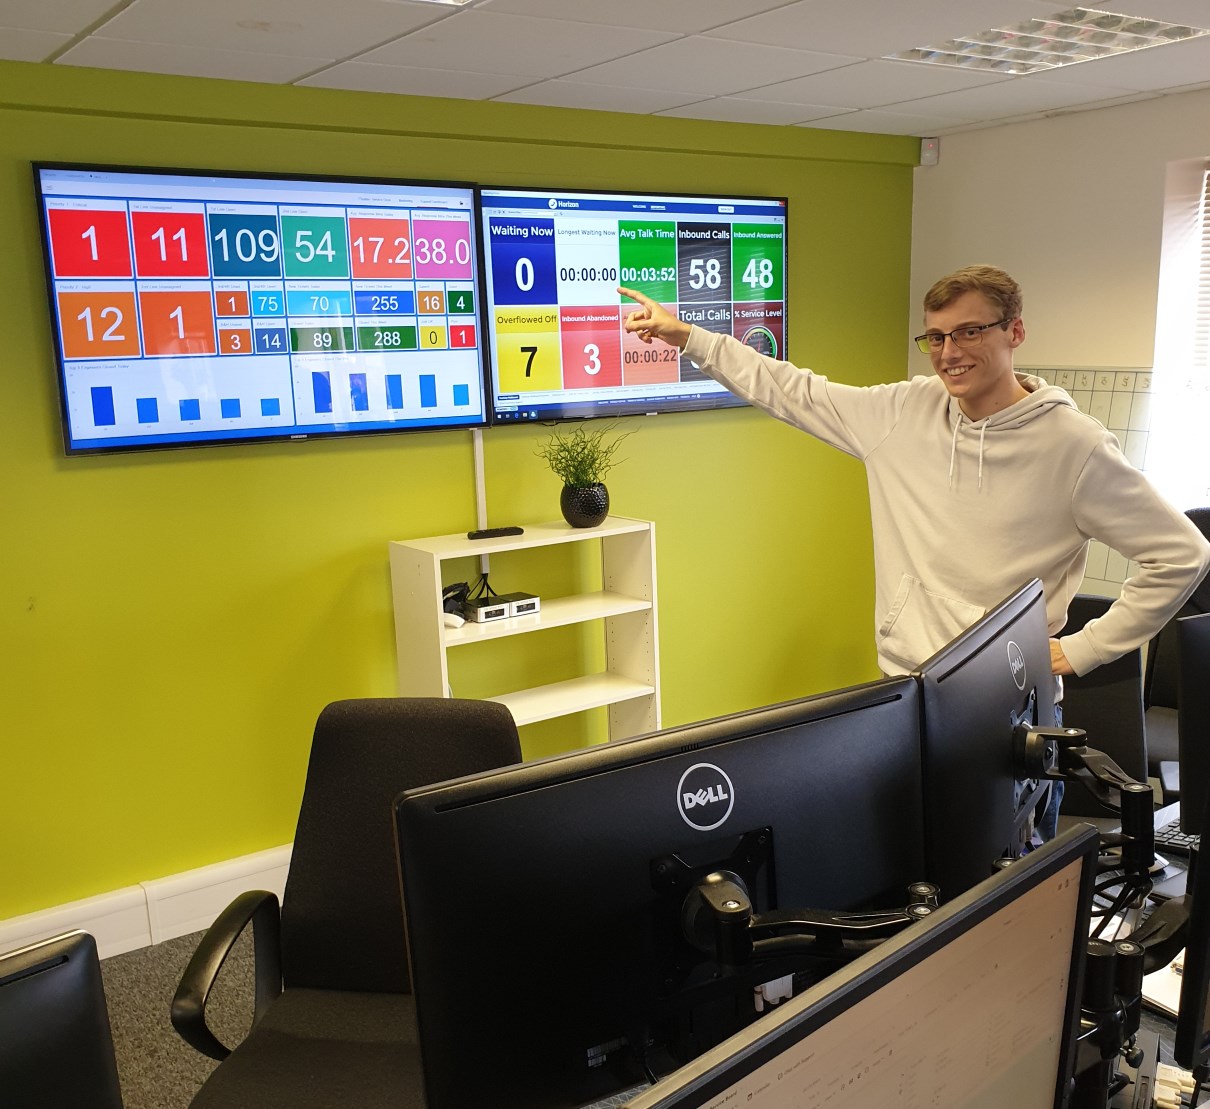 Technician pointing to a TV screen showing a service desk dashboard